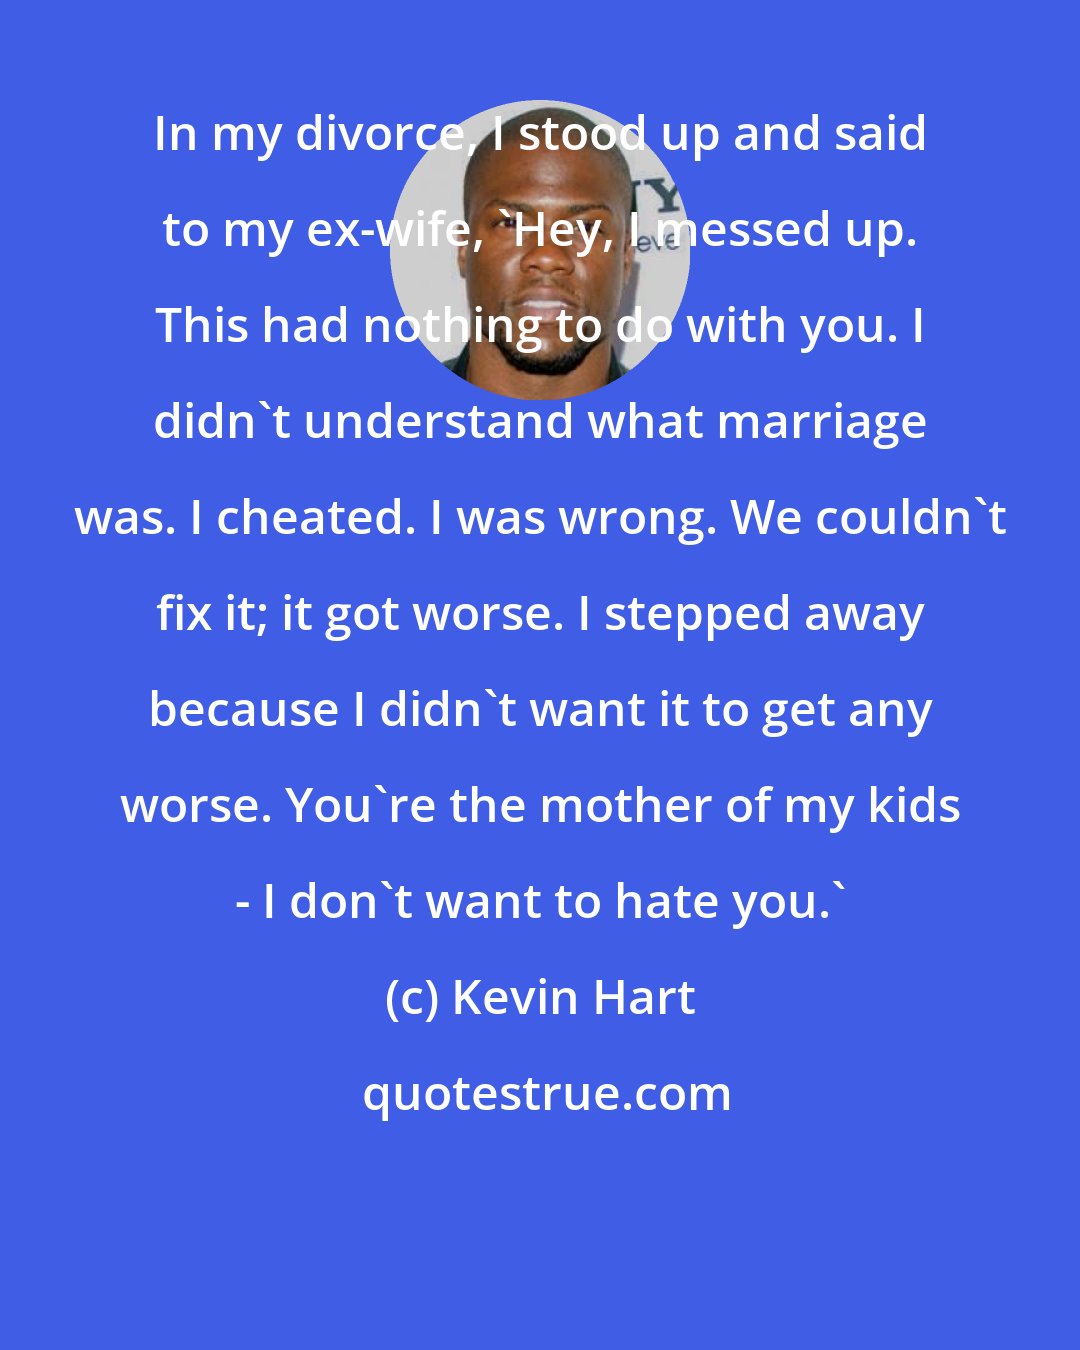 Kevin Hart: In my divorce, I stood up and said to my ex-wife, 'Hey, I messed up. This had nothing to do with you. I didn't understand what marriage was. I cheated. I was wrong. We couldn't fix it; it got worse. I stepped away because I didn't want it to get any worse. You're the mother of my kids - I don't want to hate you.'